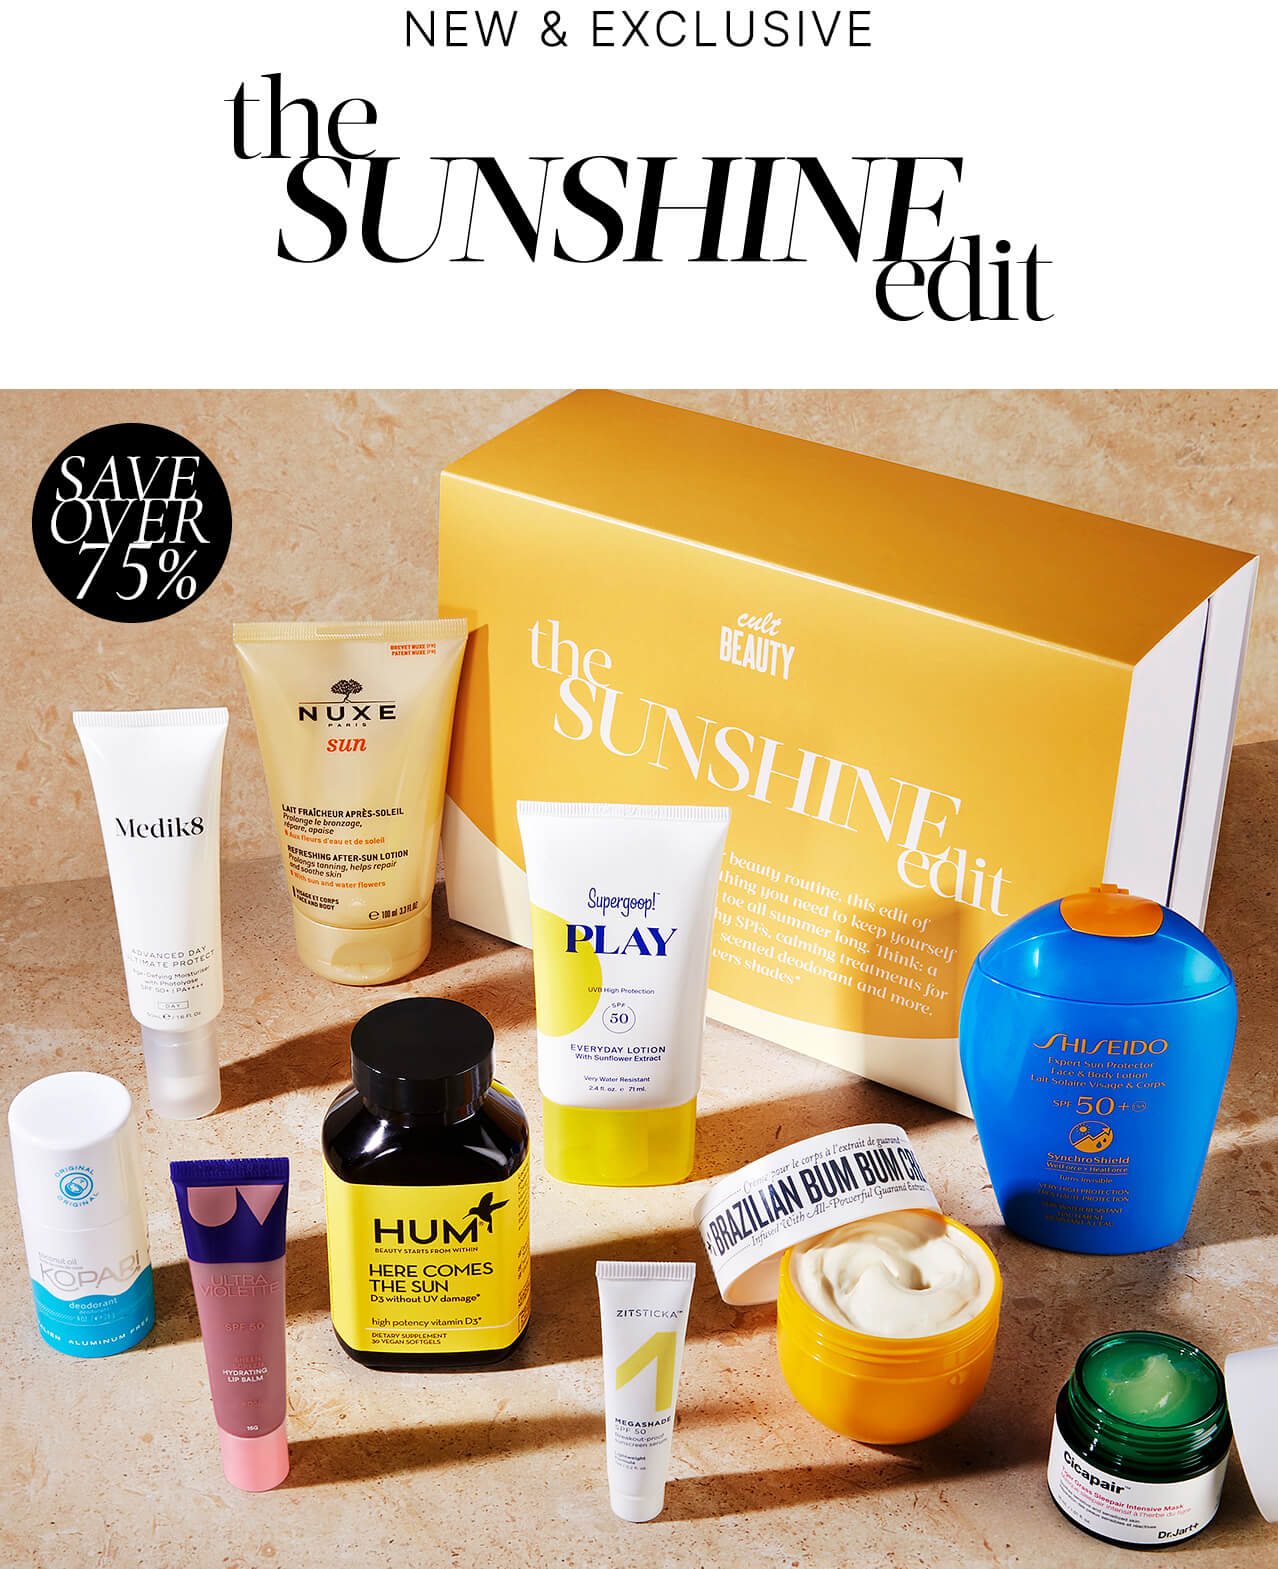 NEW & EXCLUSIVE THE SUNSHINE EDIT